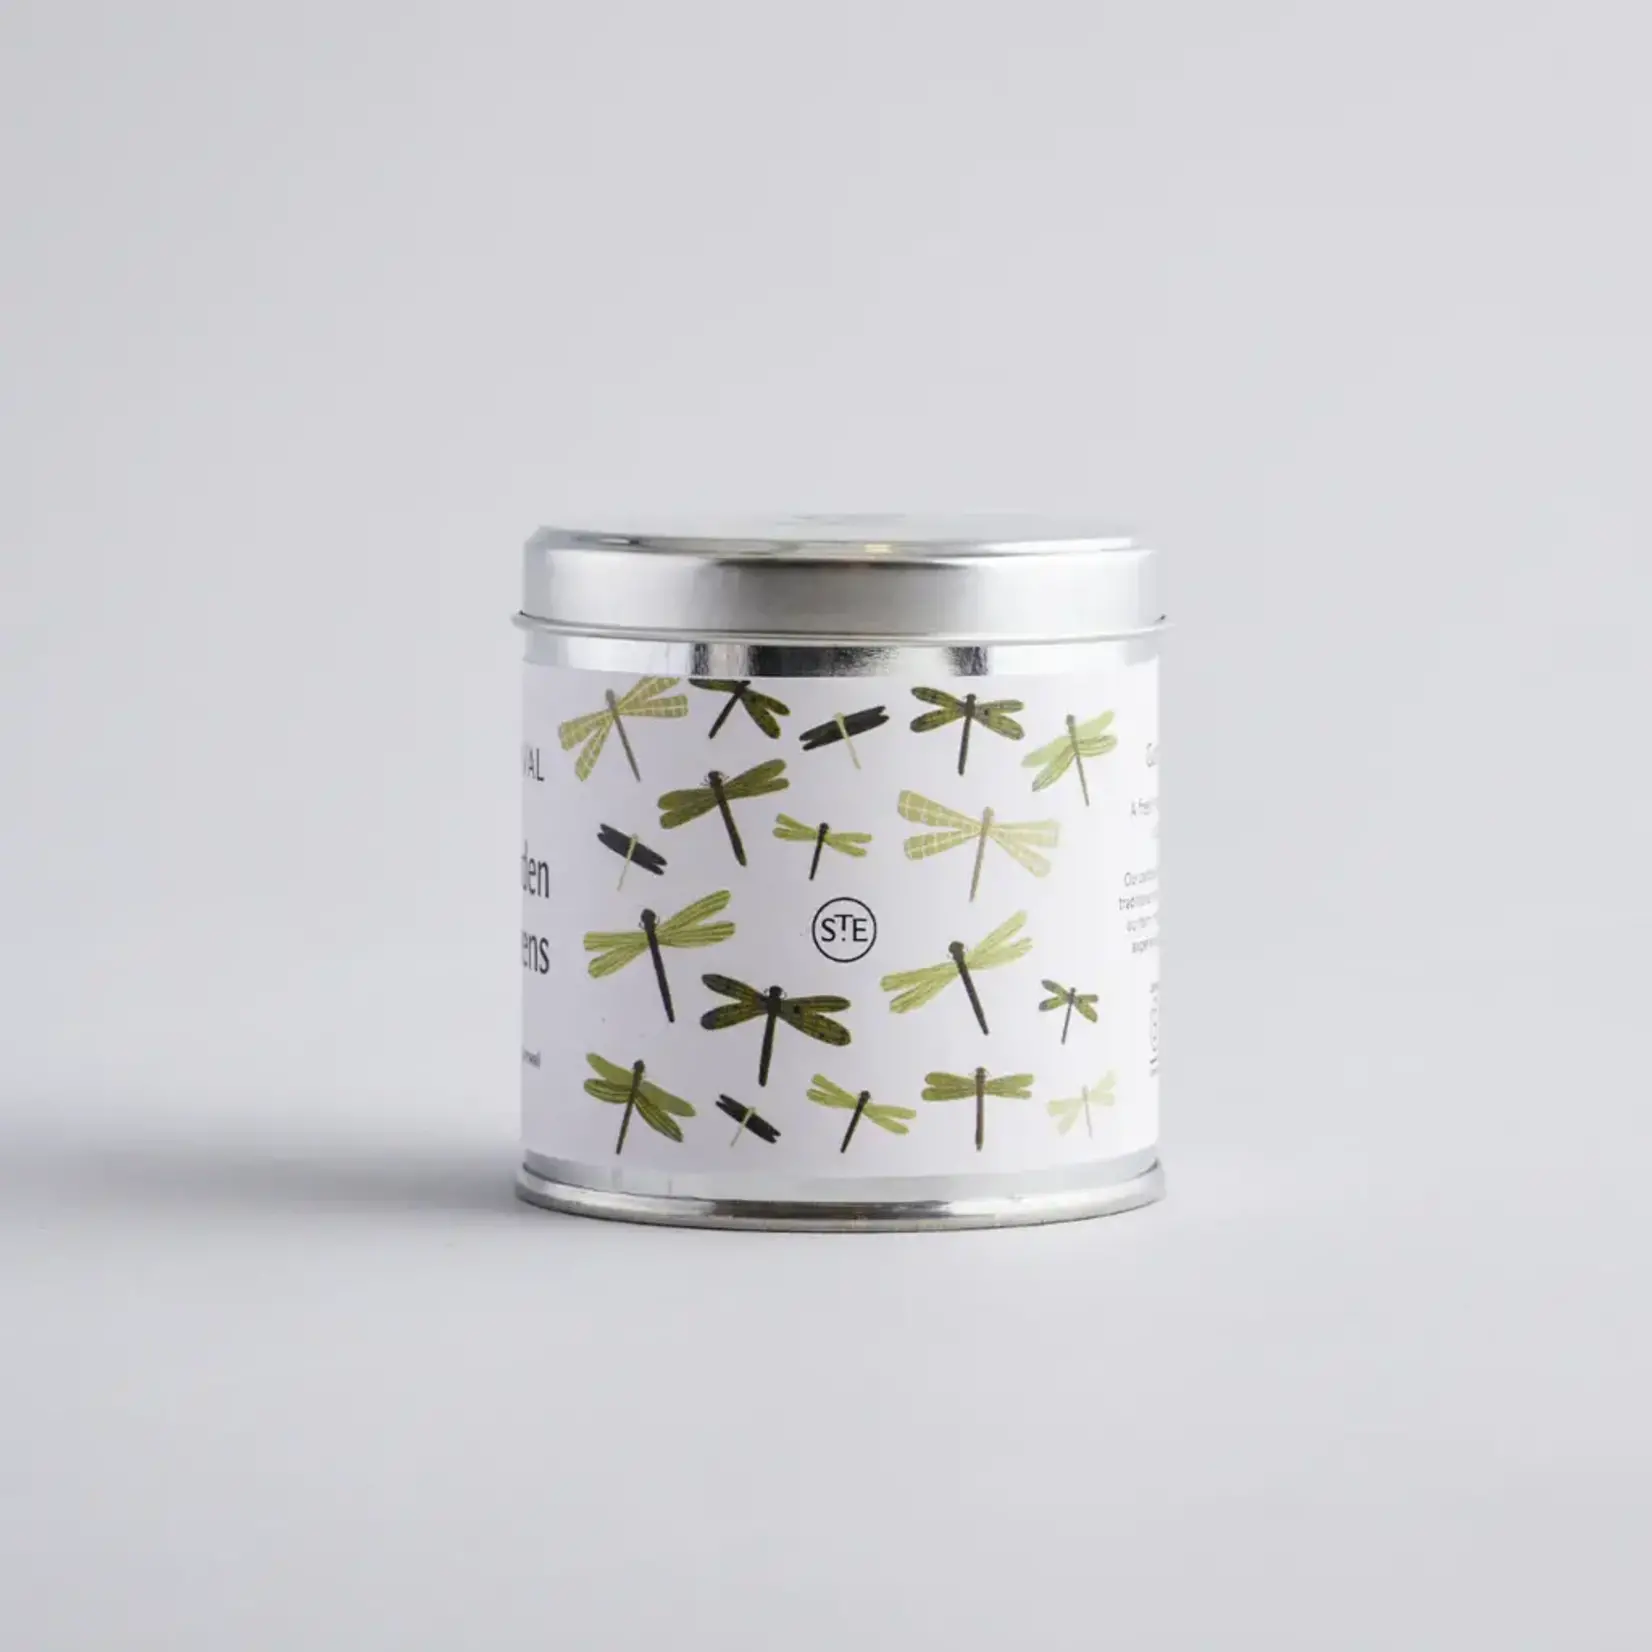 St. Eval St Eval Garden Greens Nature's Garden Scented Tin Candle